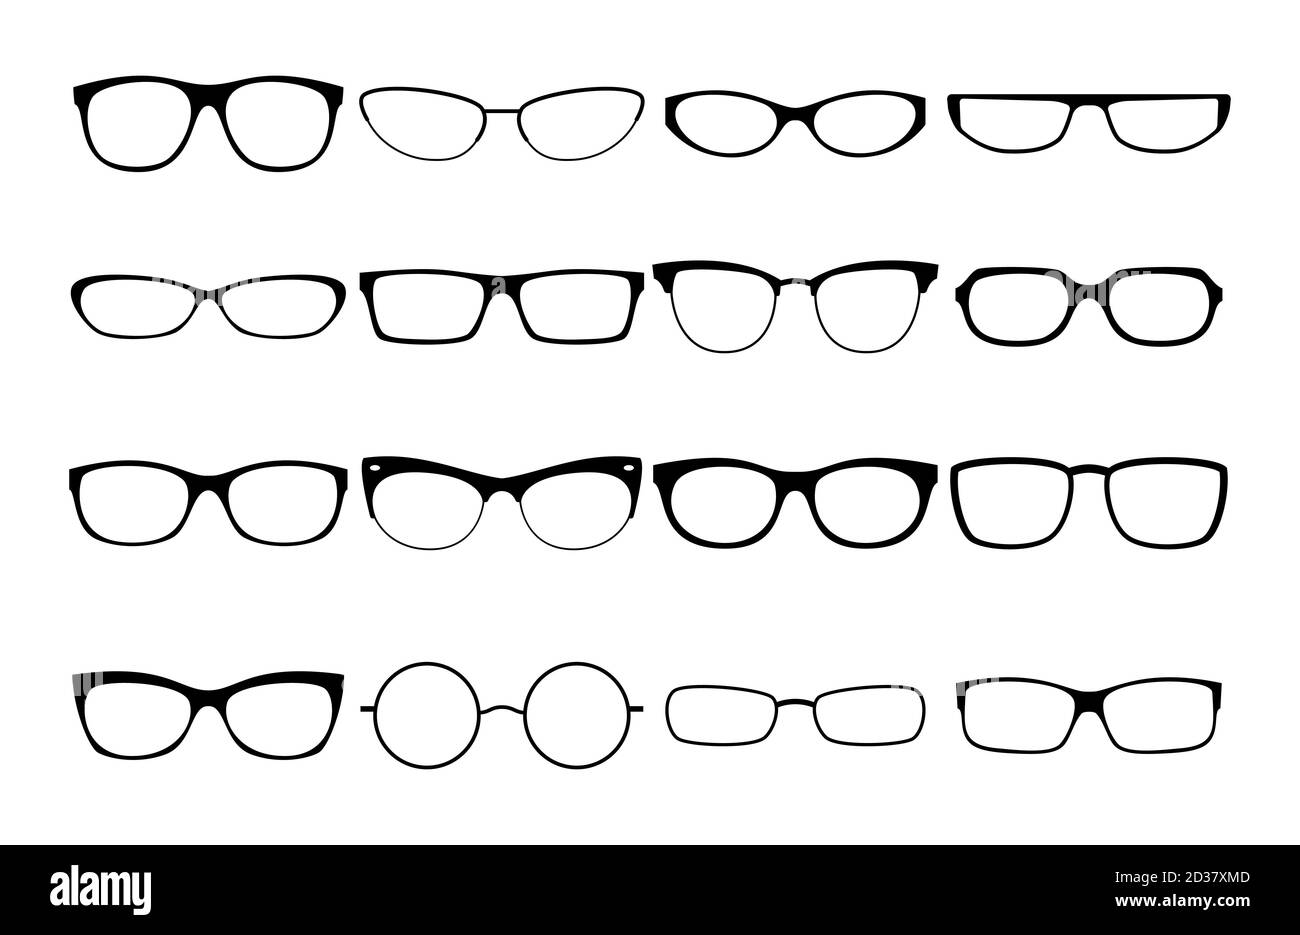 Vector glasses frames. Black rim glasses vector collection, eyeglasses frame fashion model set, sunglass spectacles silhouettes for man and woman Stock Vector